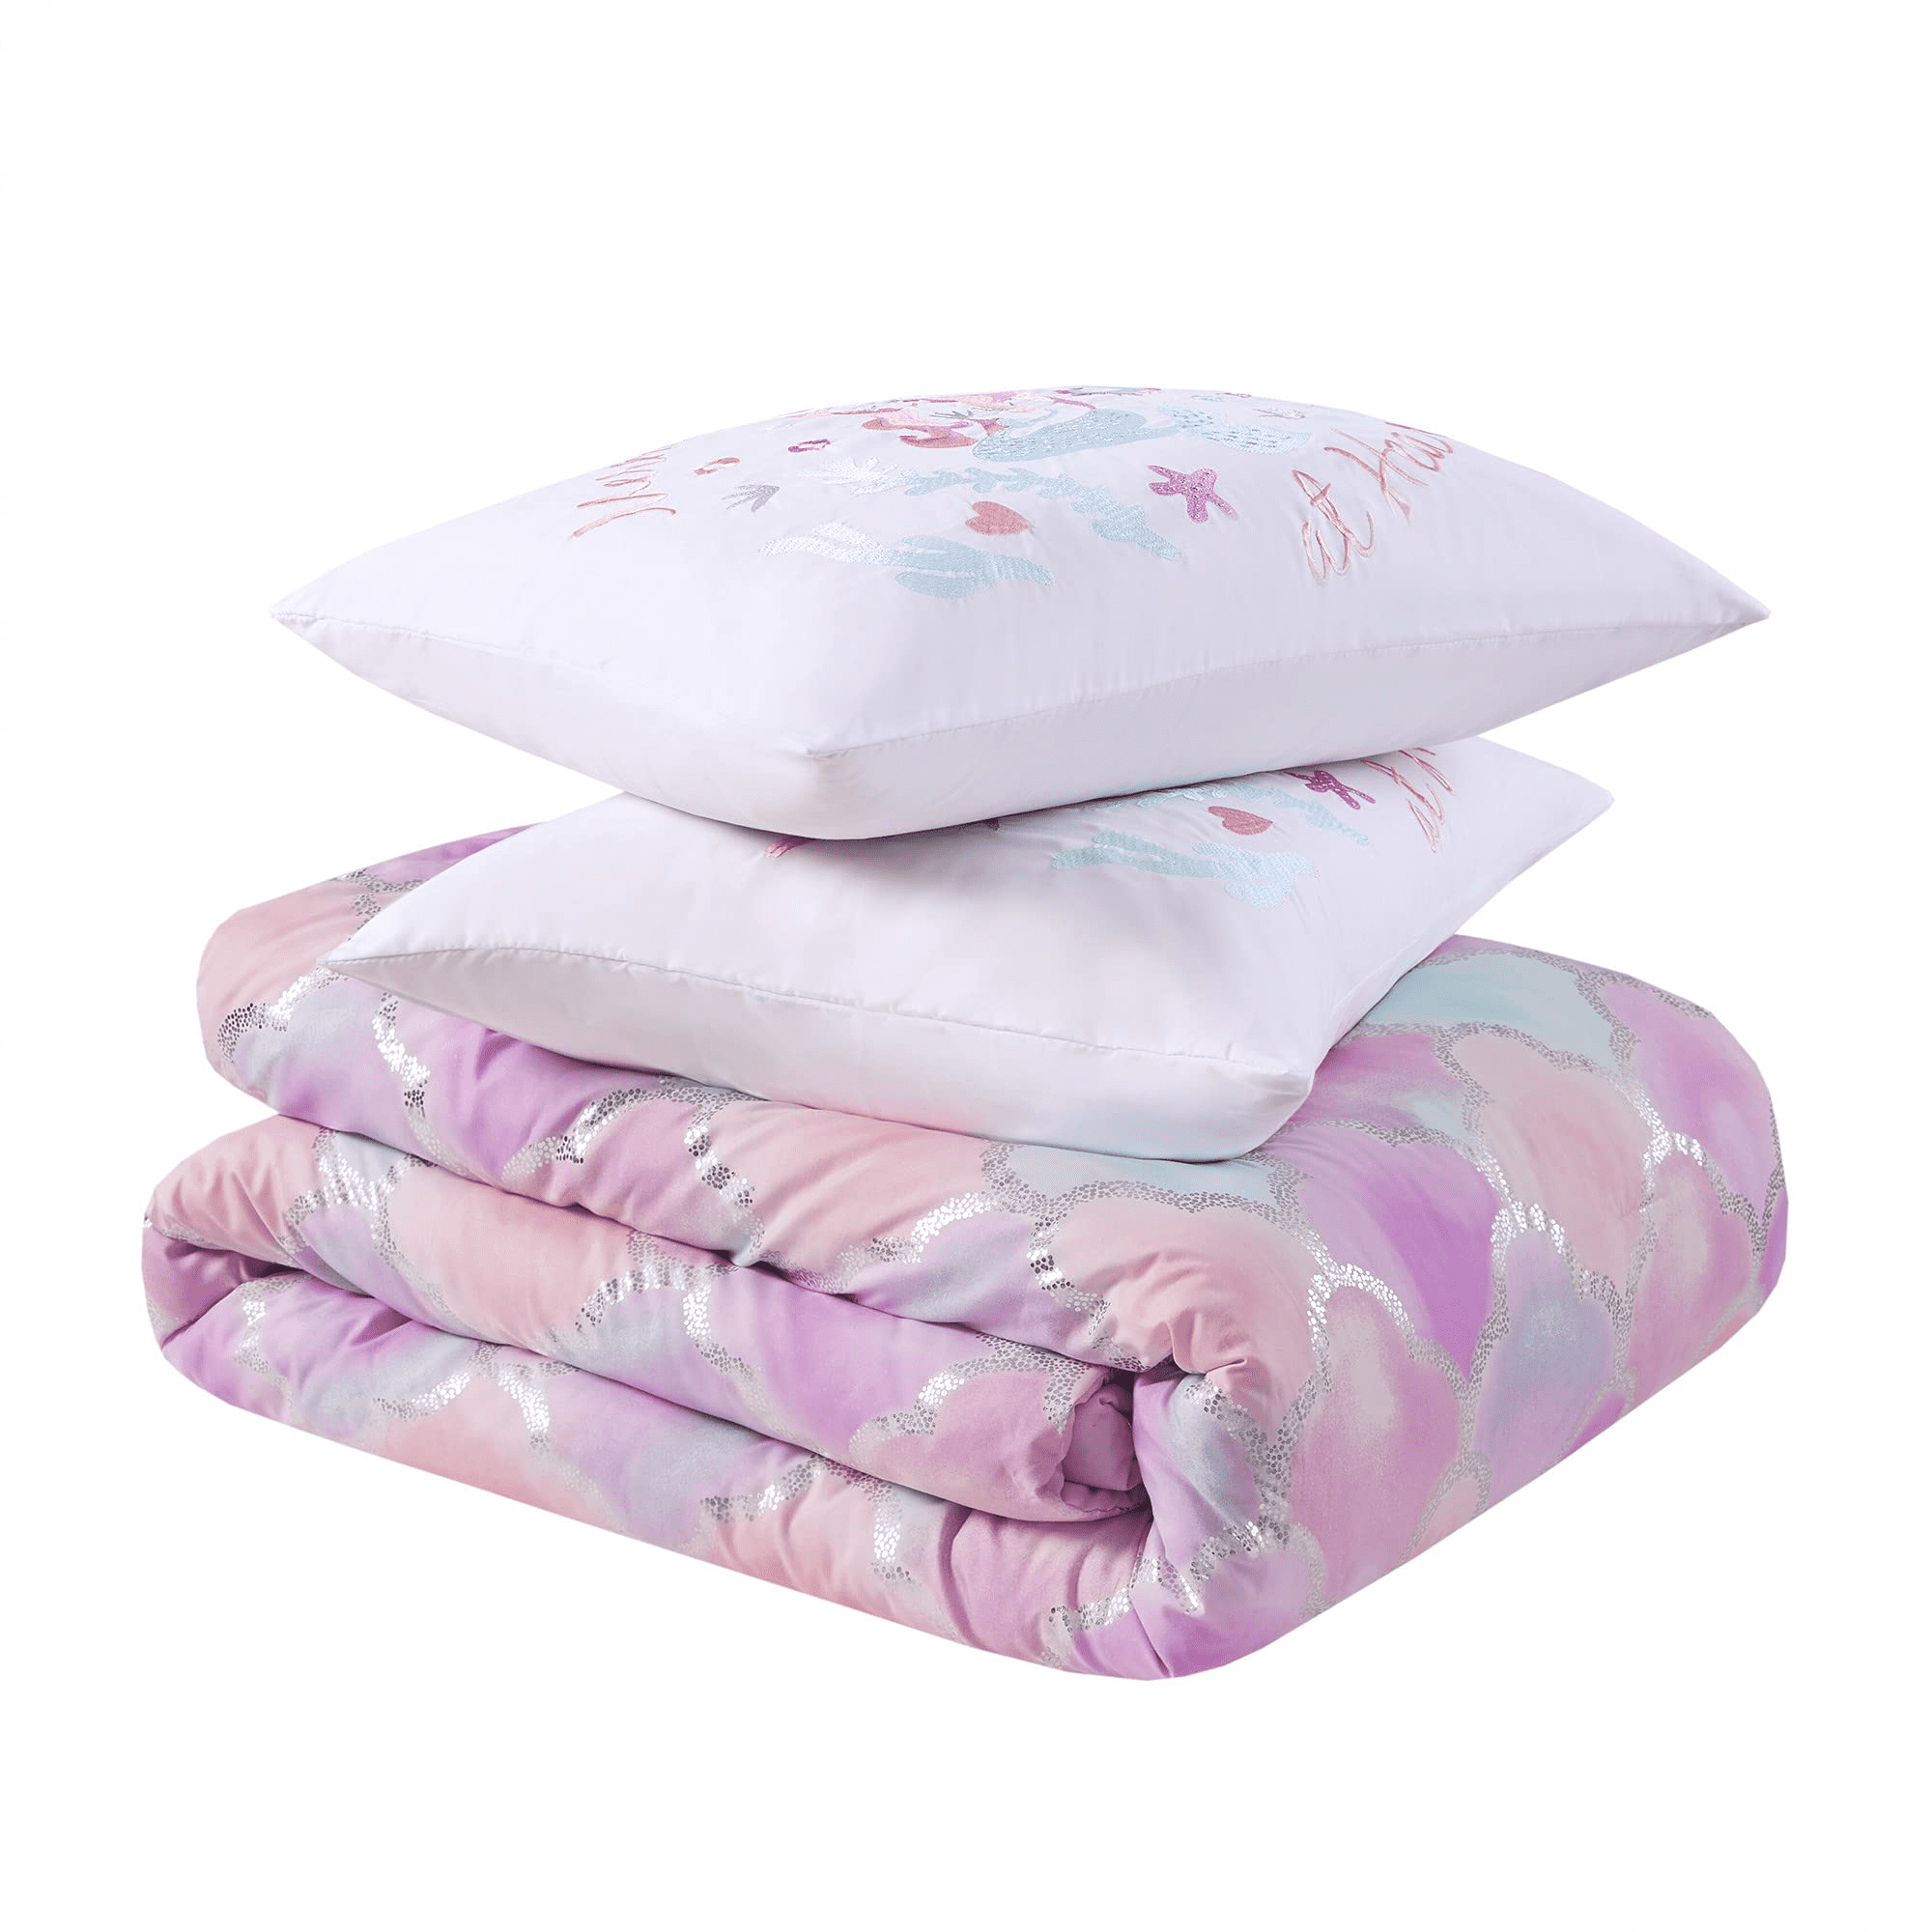 Comfort Spaces Full/Queen Comforter Set for Girl Bedroom Metallic Scale  5-Piece Pink Bedding Set with Matching Sham And Pillowcase 